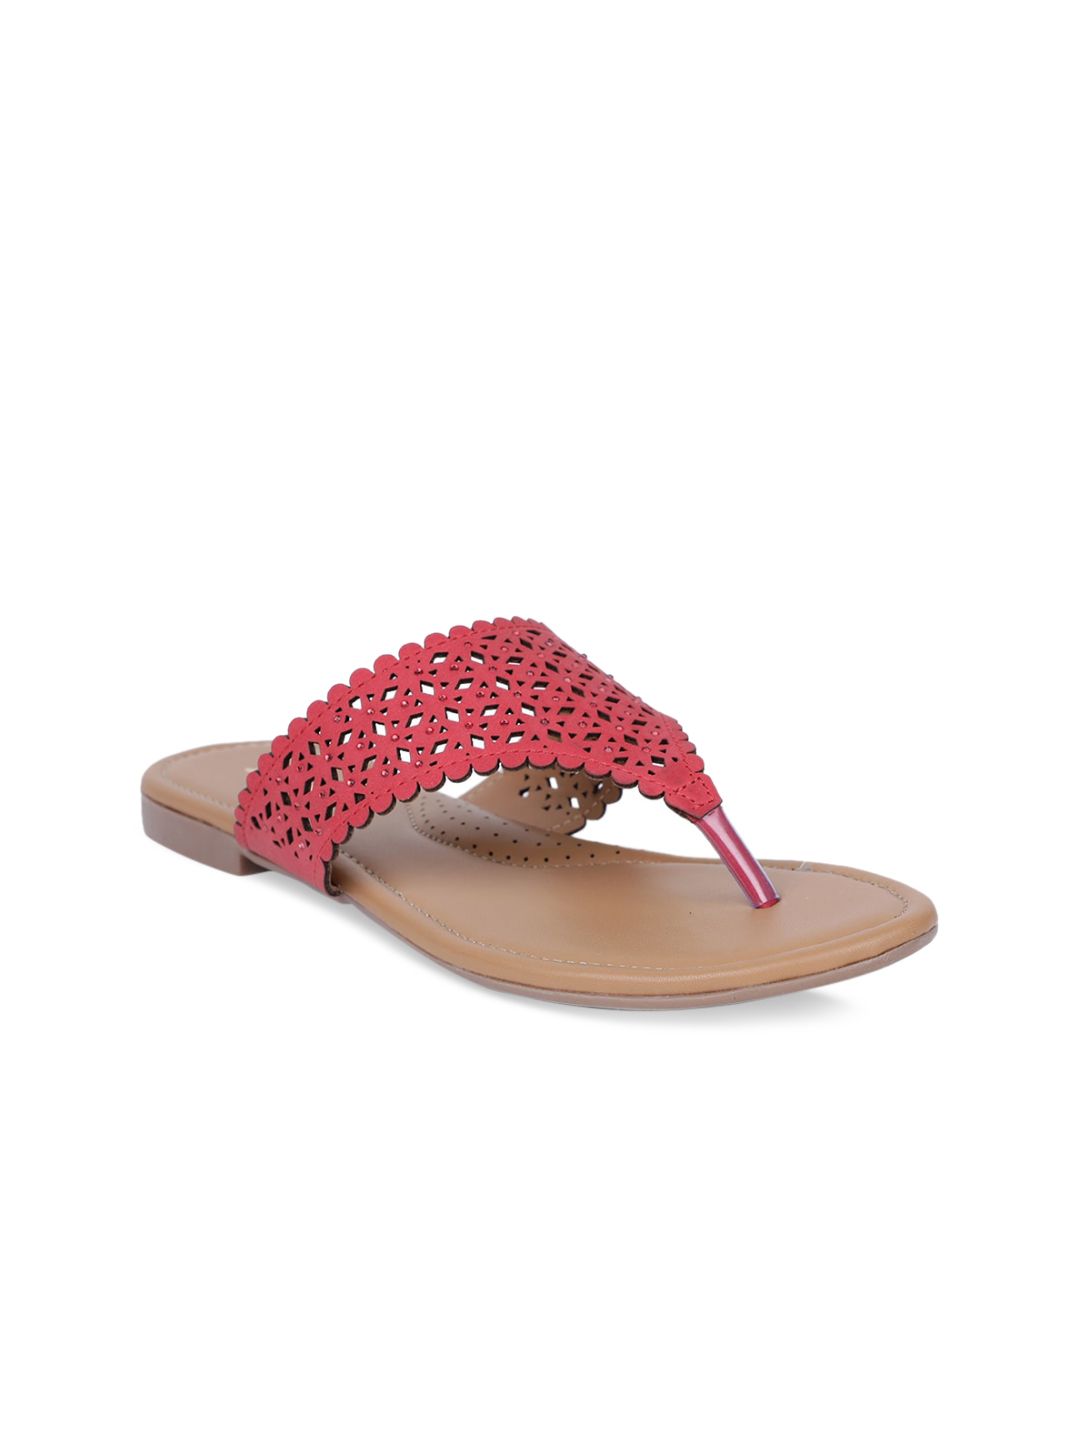 Bata Women Red Textured PU Open Toe Flats Price in India